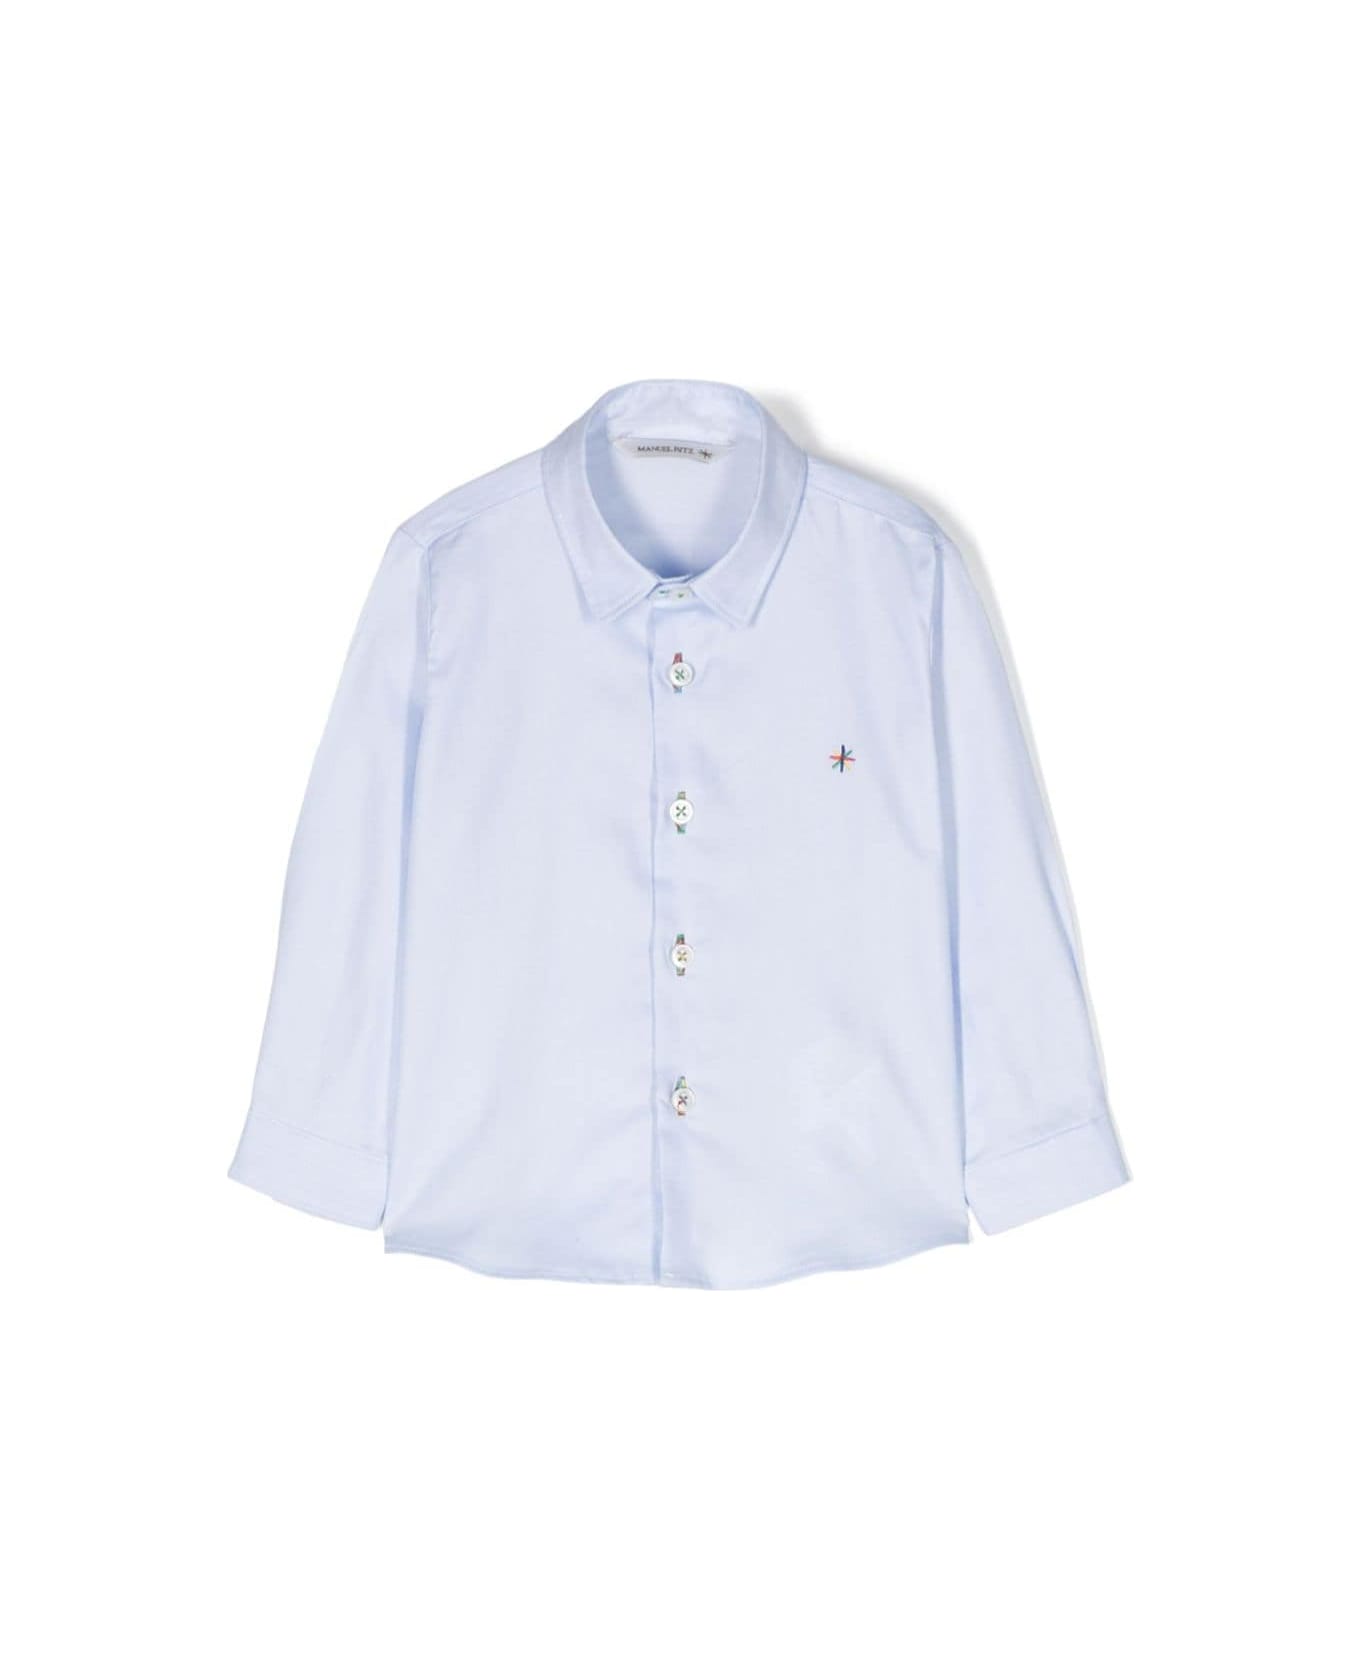 Manuel Ritz Shirt With Embroidery - Light blue シャツ